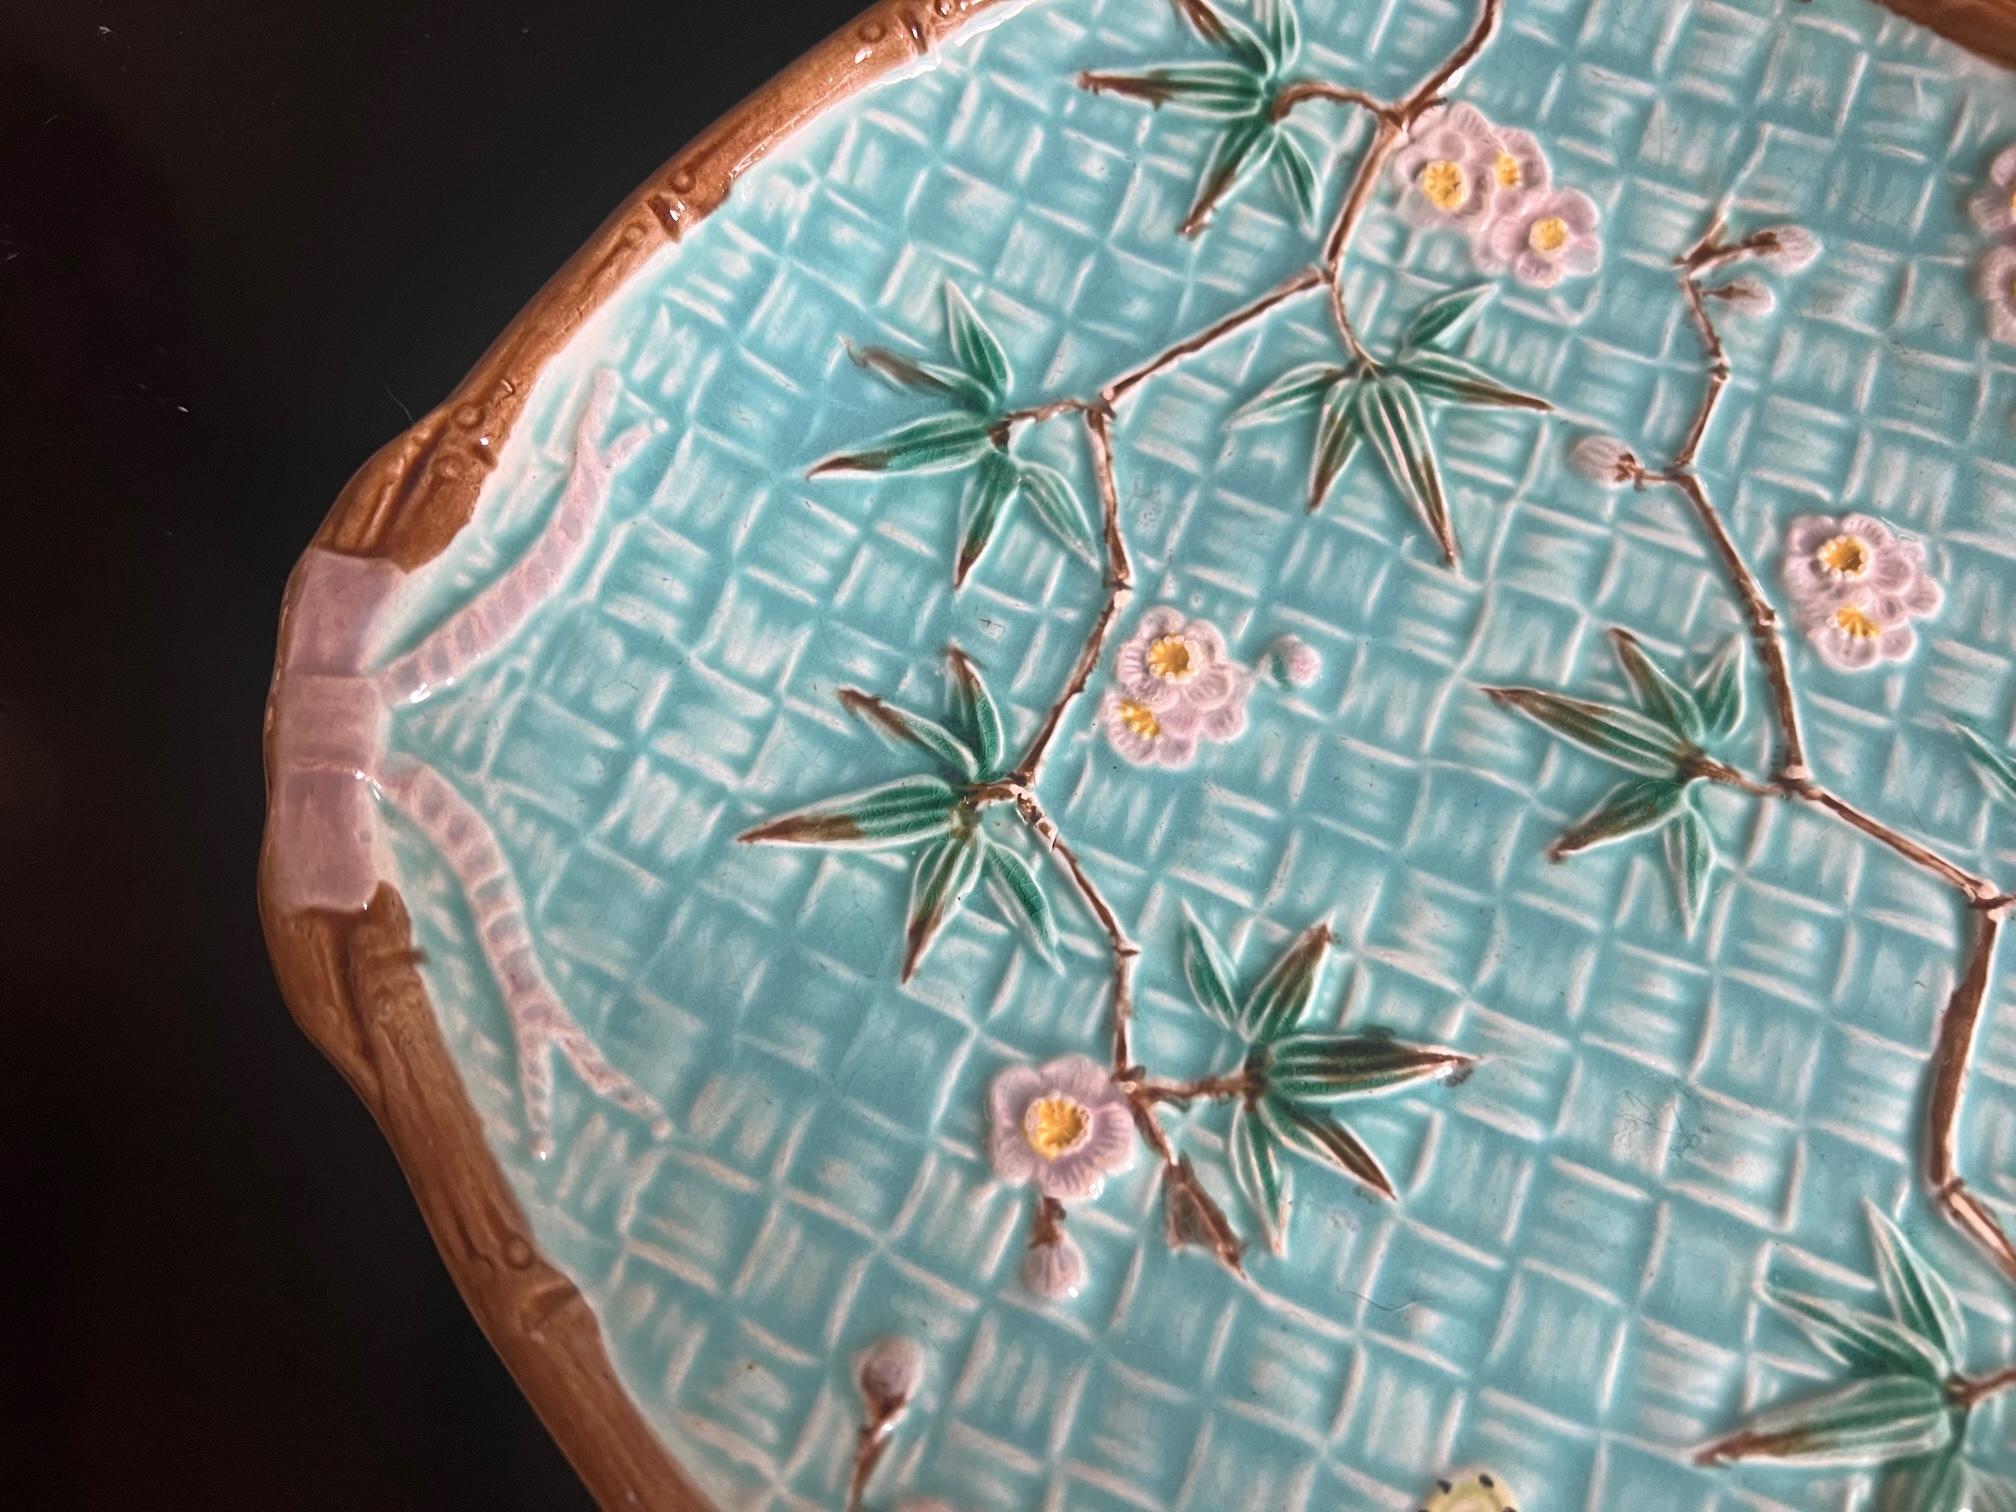 19th Century Majolica Platter by Simon Fielding In Good Condition For Sale In Ross, CA